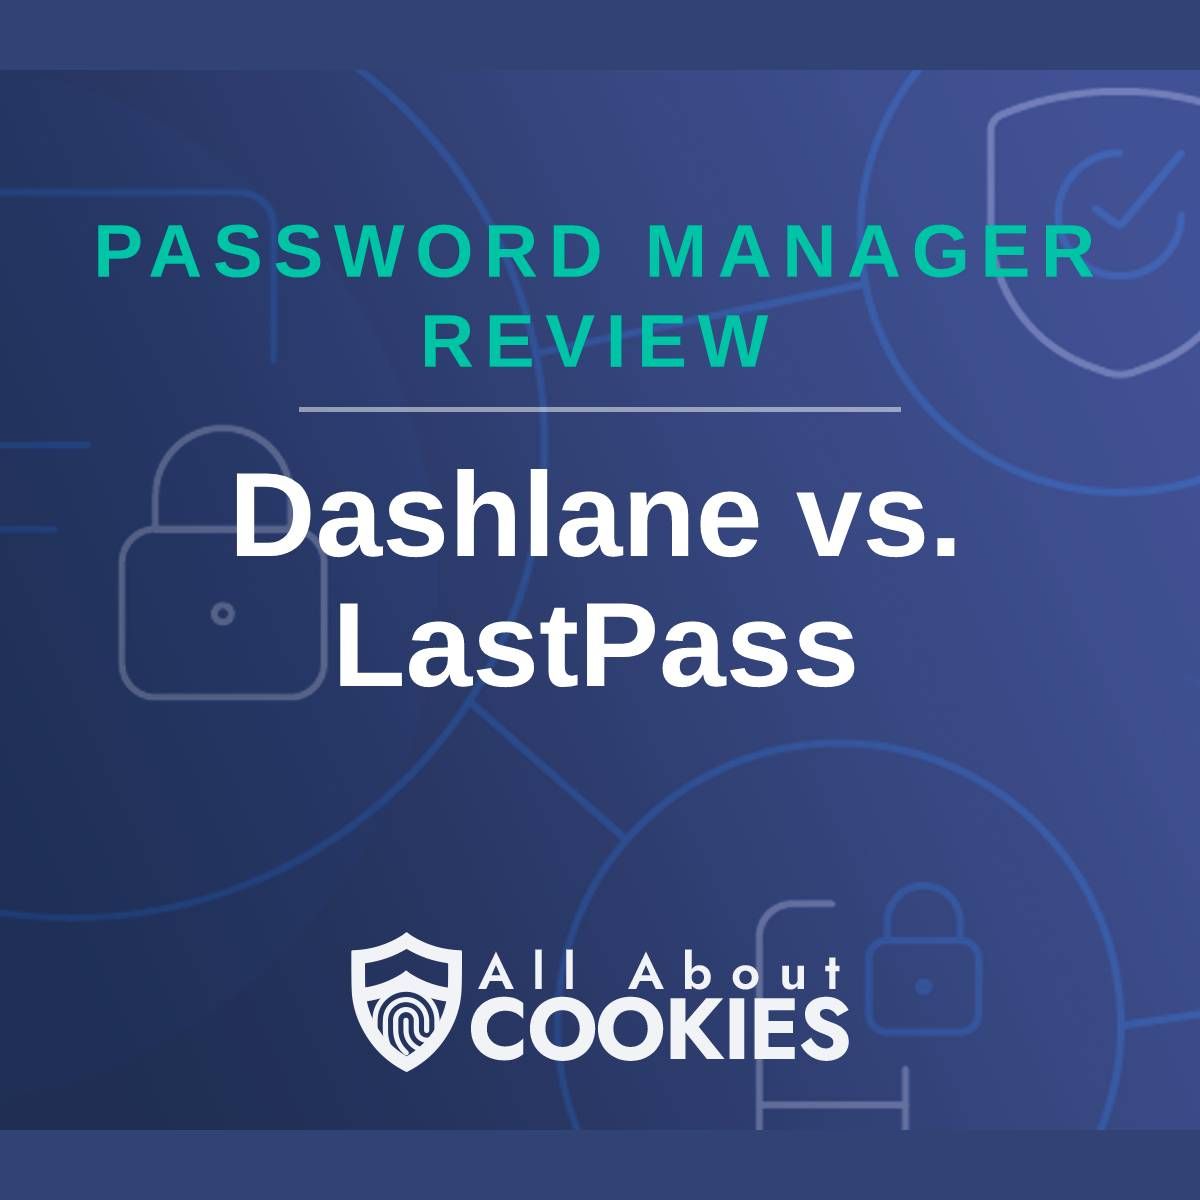 A blue background with images of locks and shields with the text "Password Manager Review Dashlane vs. LastPass" and the All About Cookies logo. 